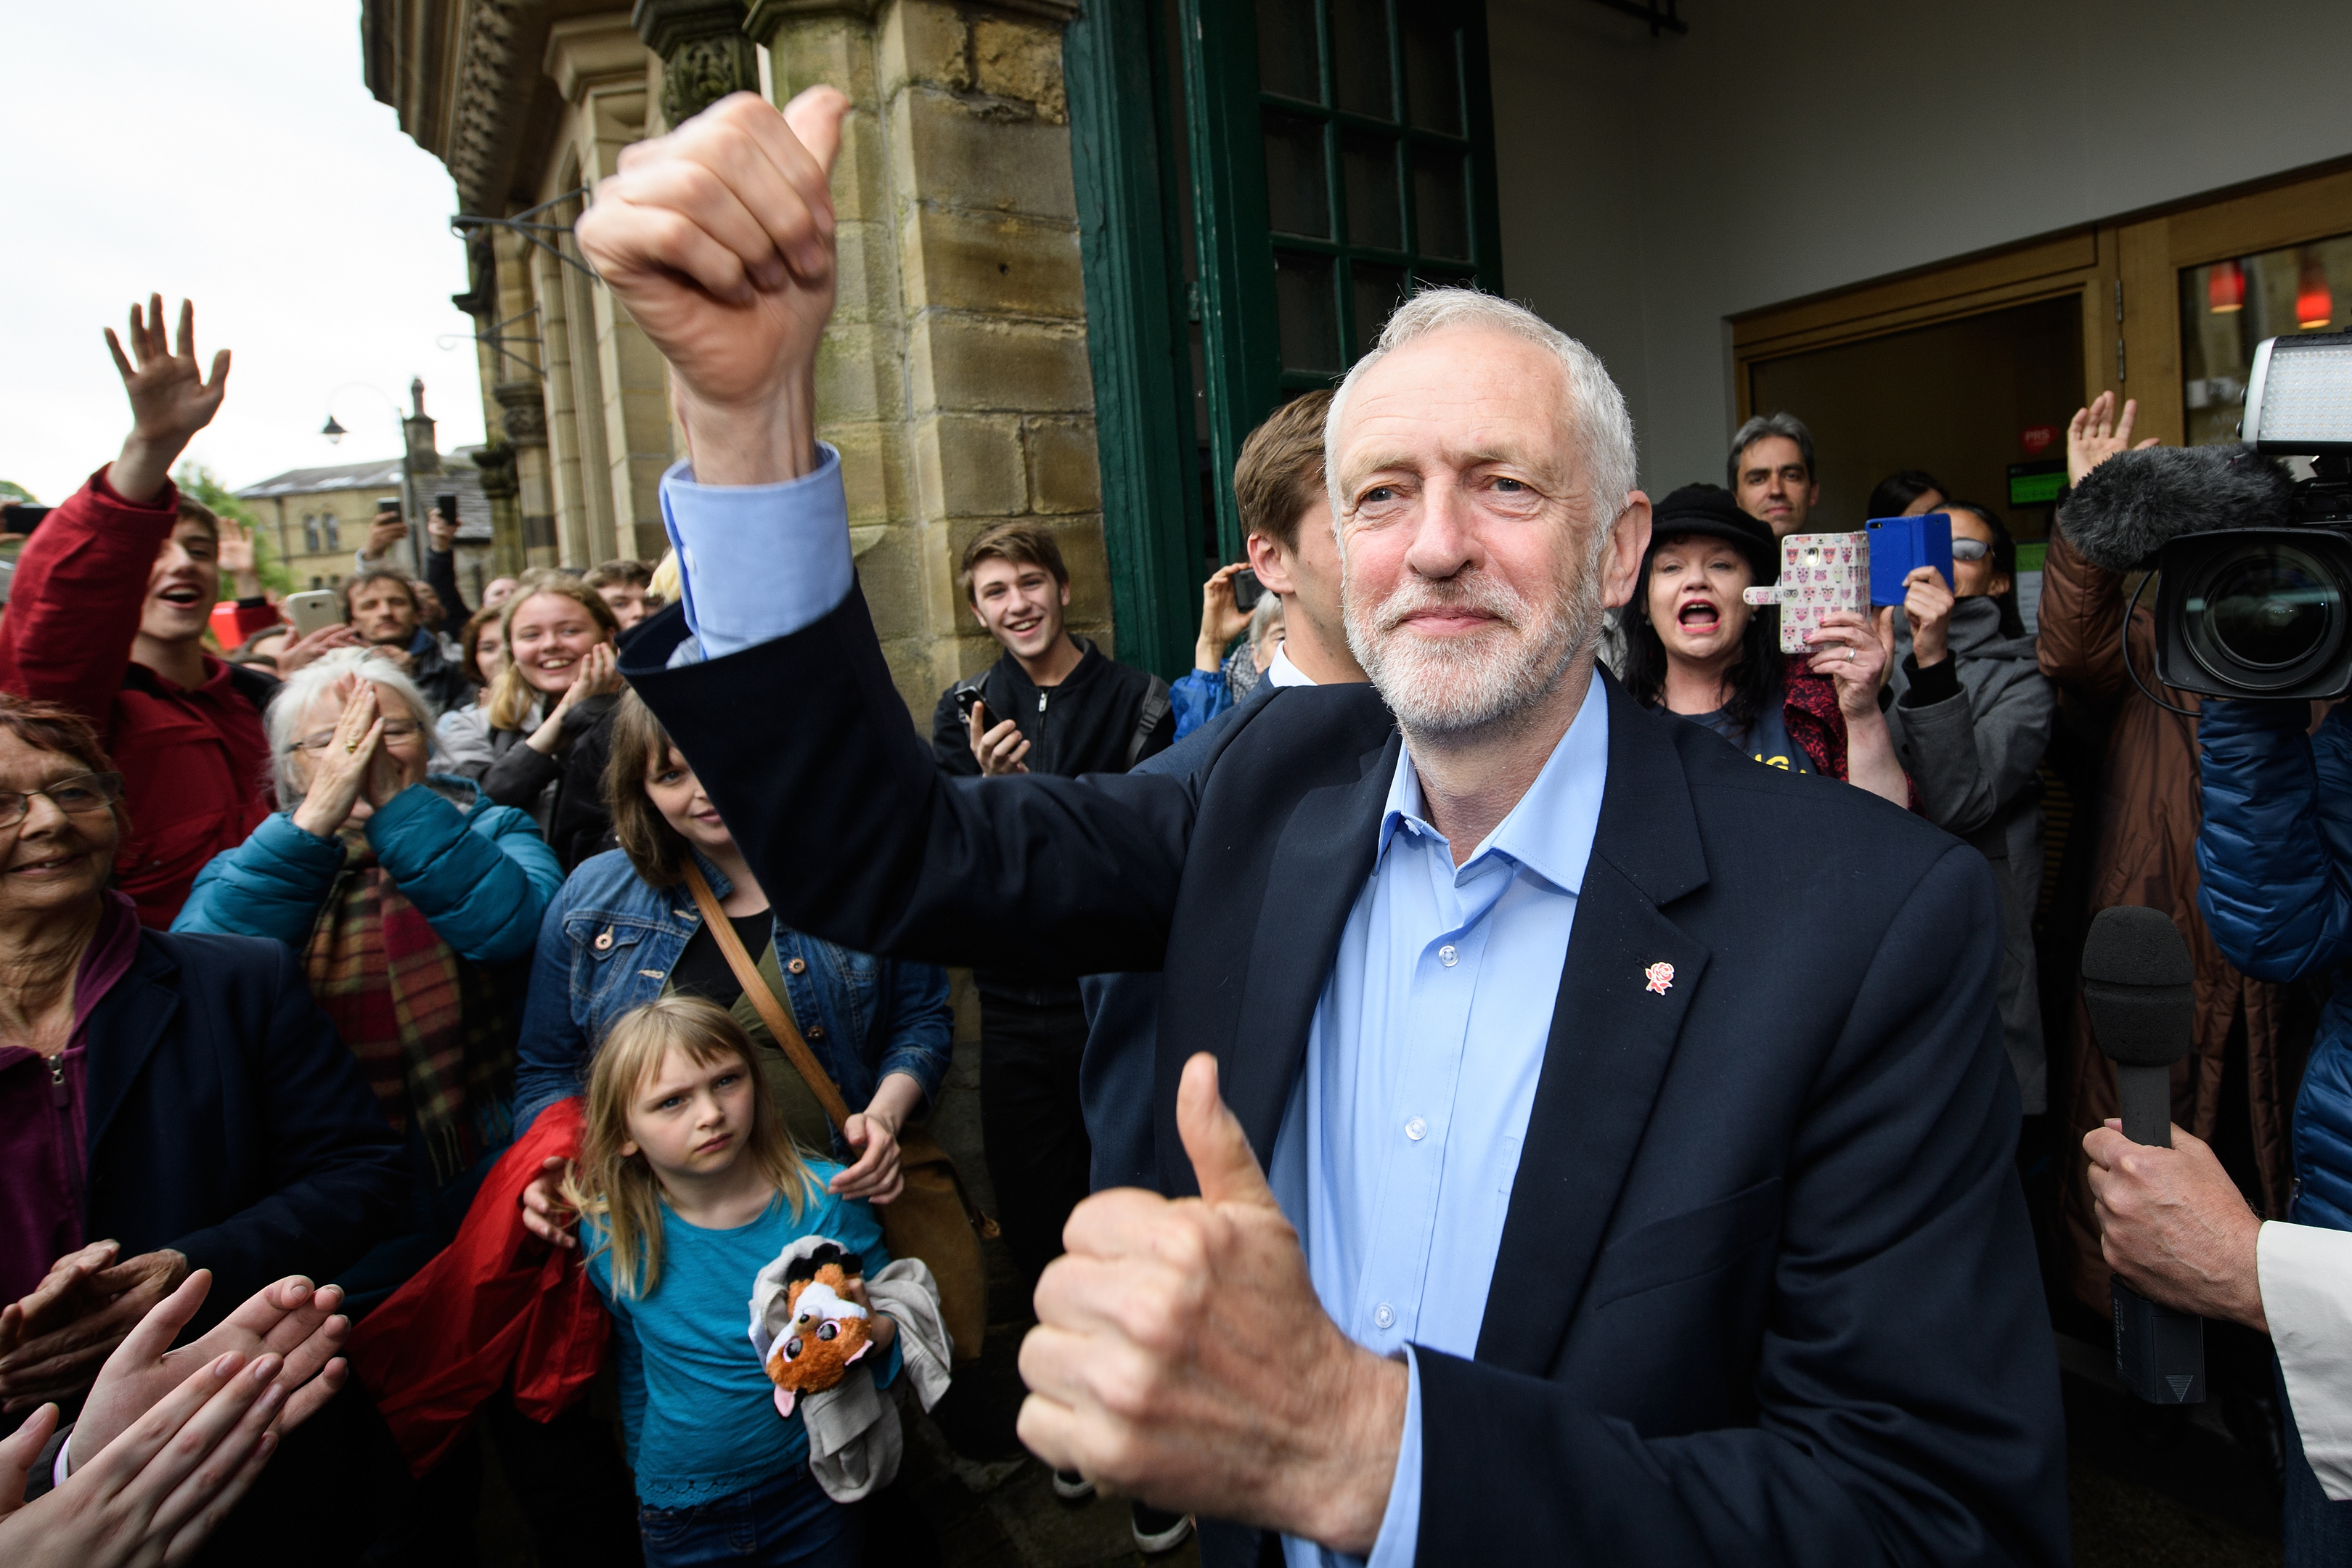 Jeremy Corbyn waves as he arrives before speaking to hundreds of people who attended an election rally on May 15, 2017 in Hebden Bridge.